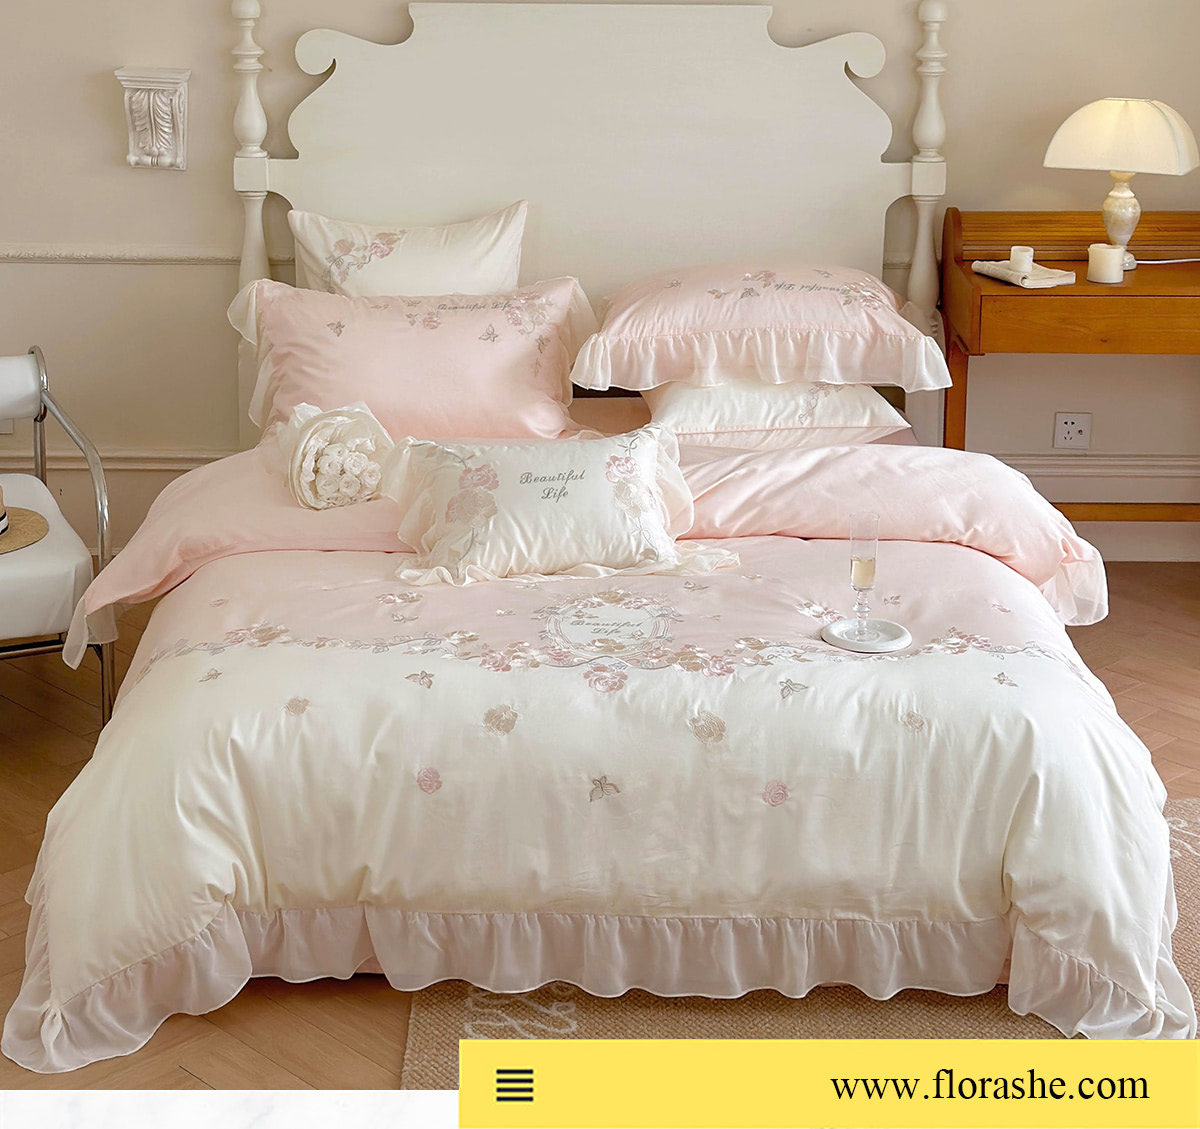 Aesthetic-100S-Cotton-Embroidery-Floral-Duvet-Cover-Pillowcases-Set07